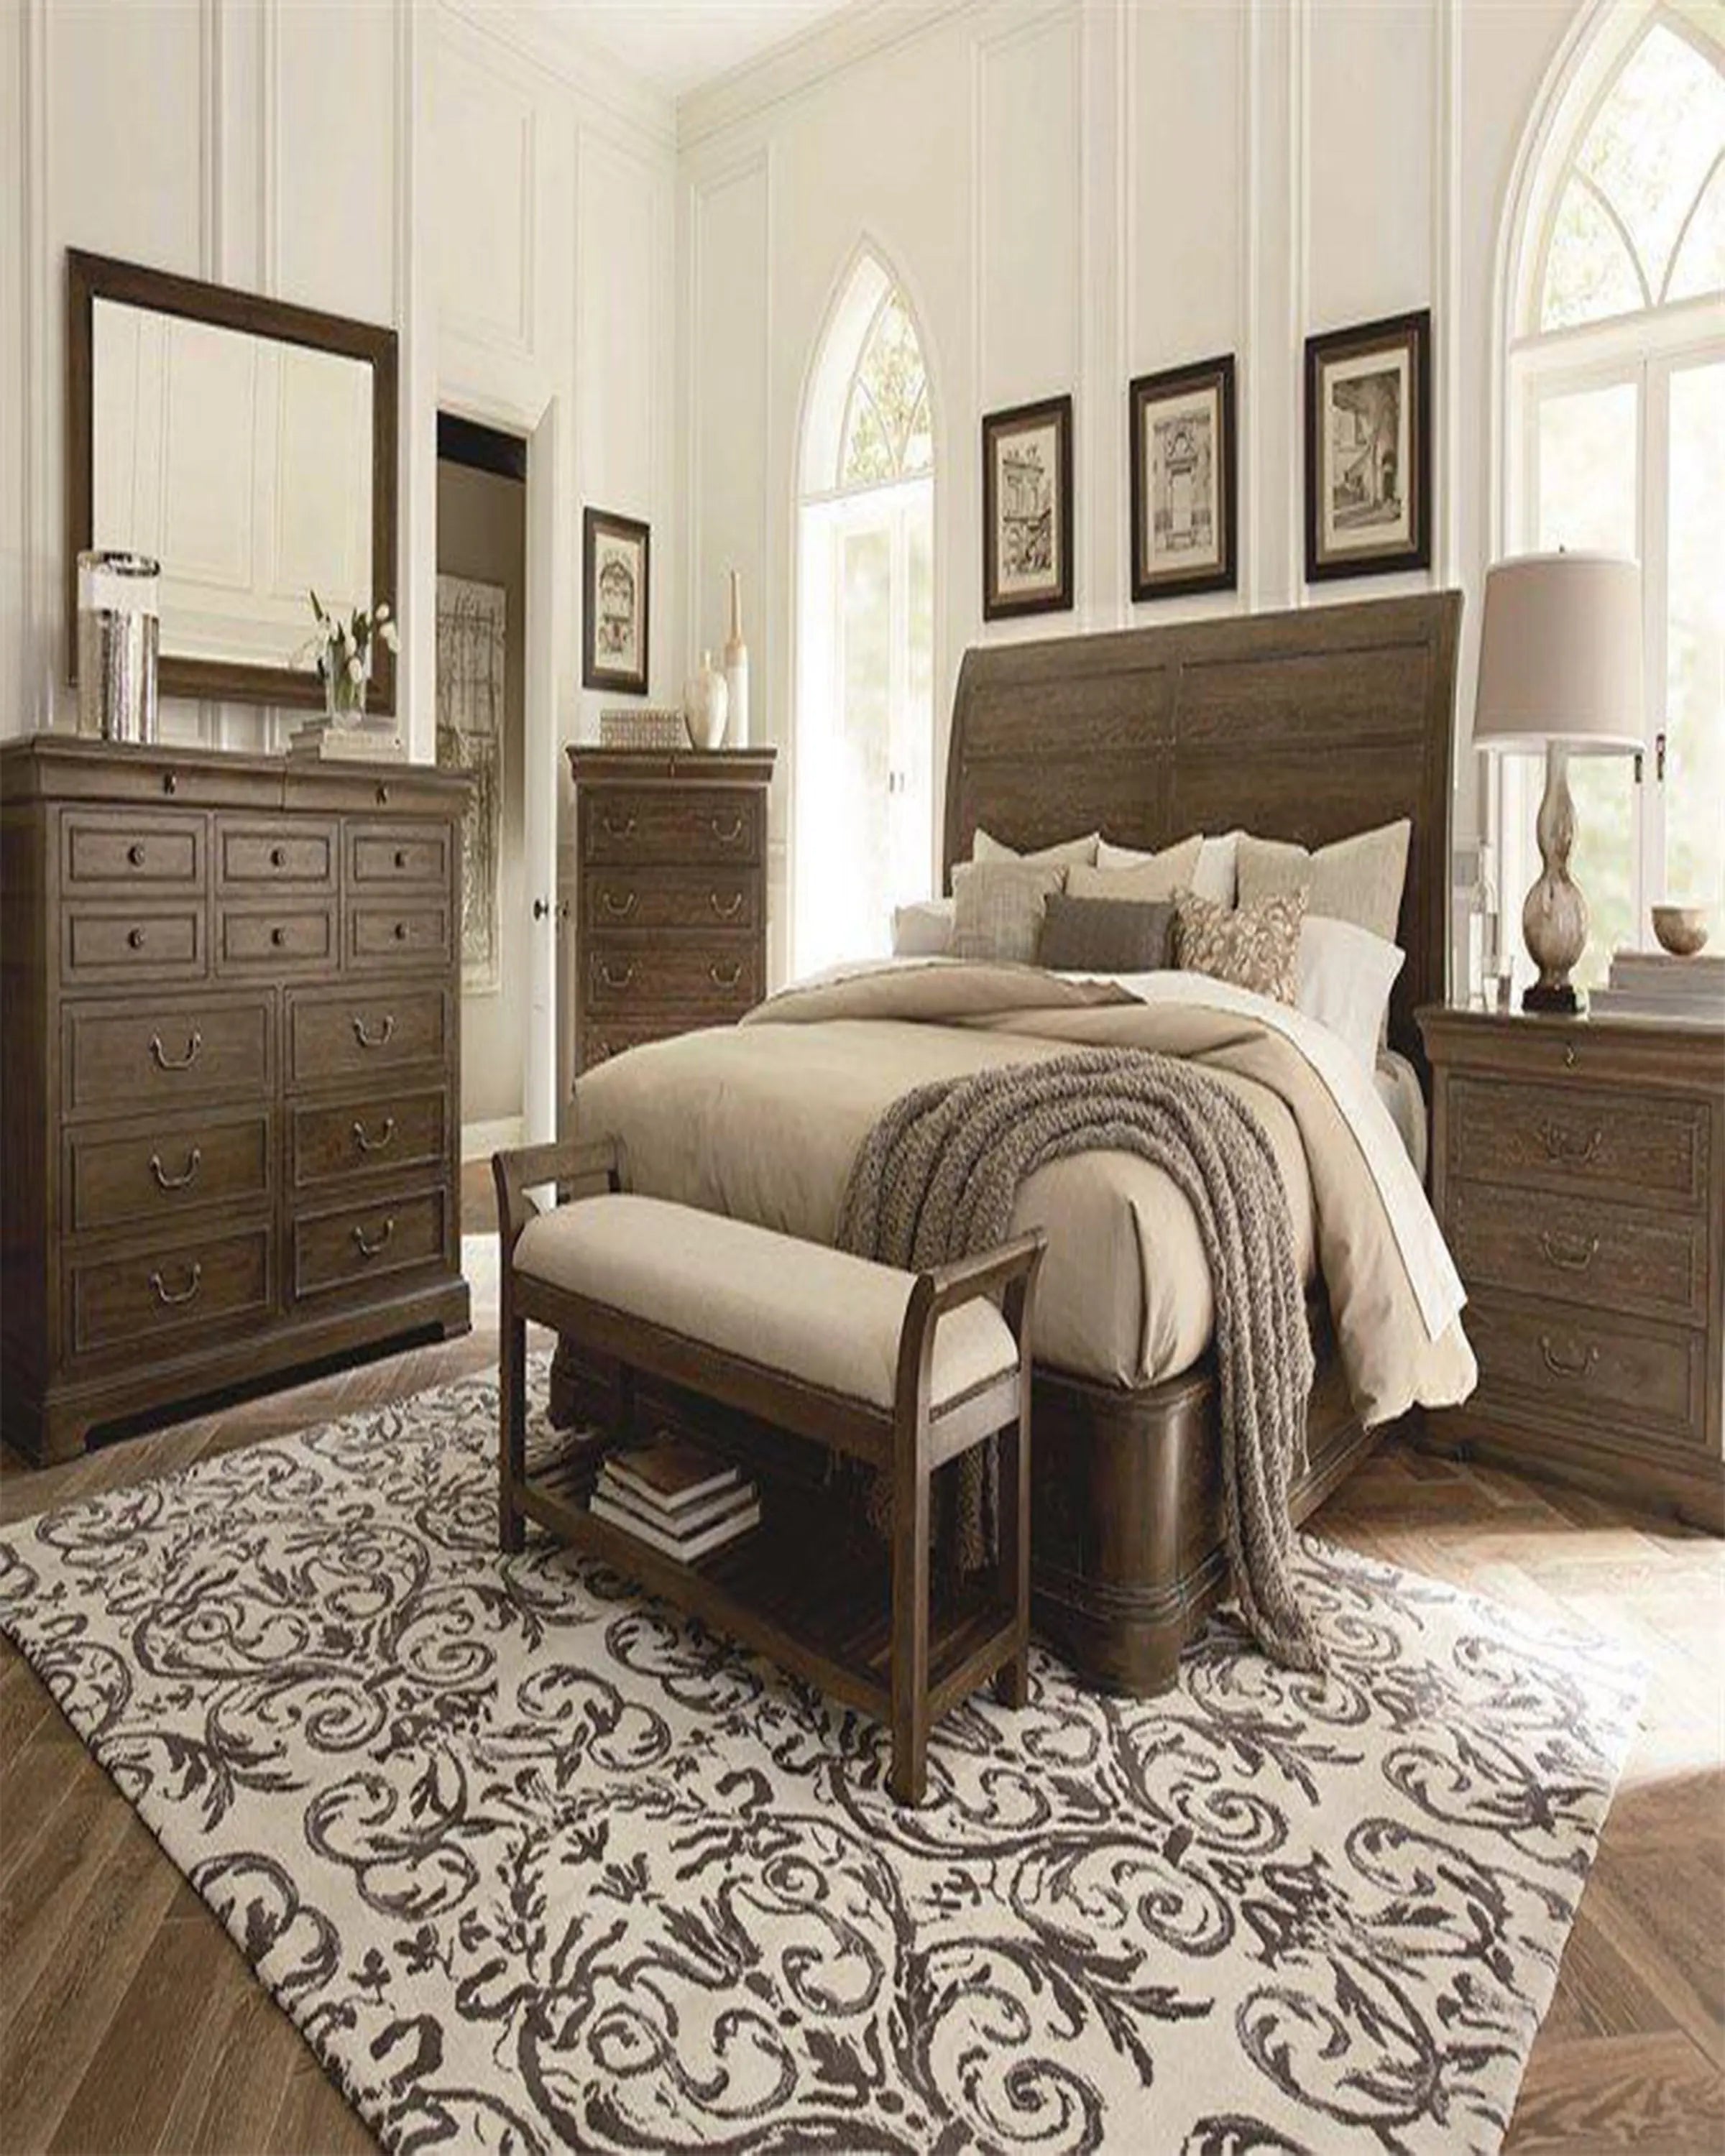 MIKE EXCLUSIVE BED SET ANGIE HOMES